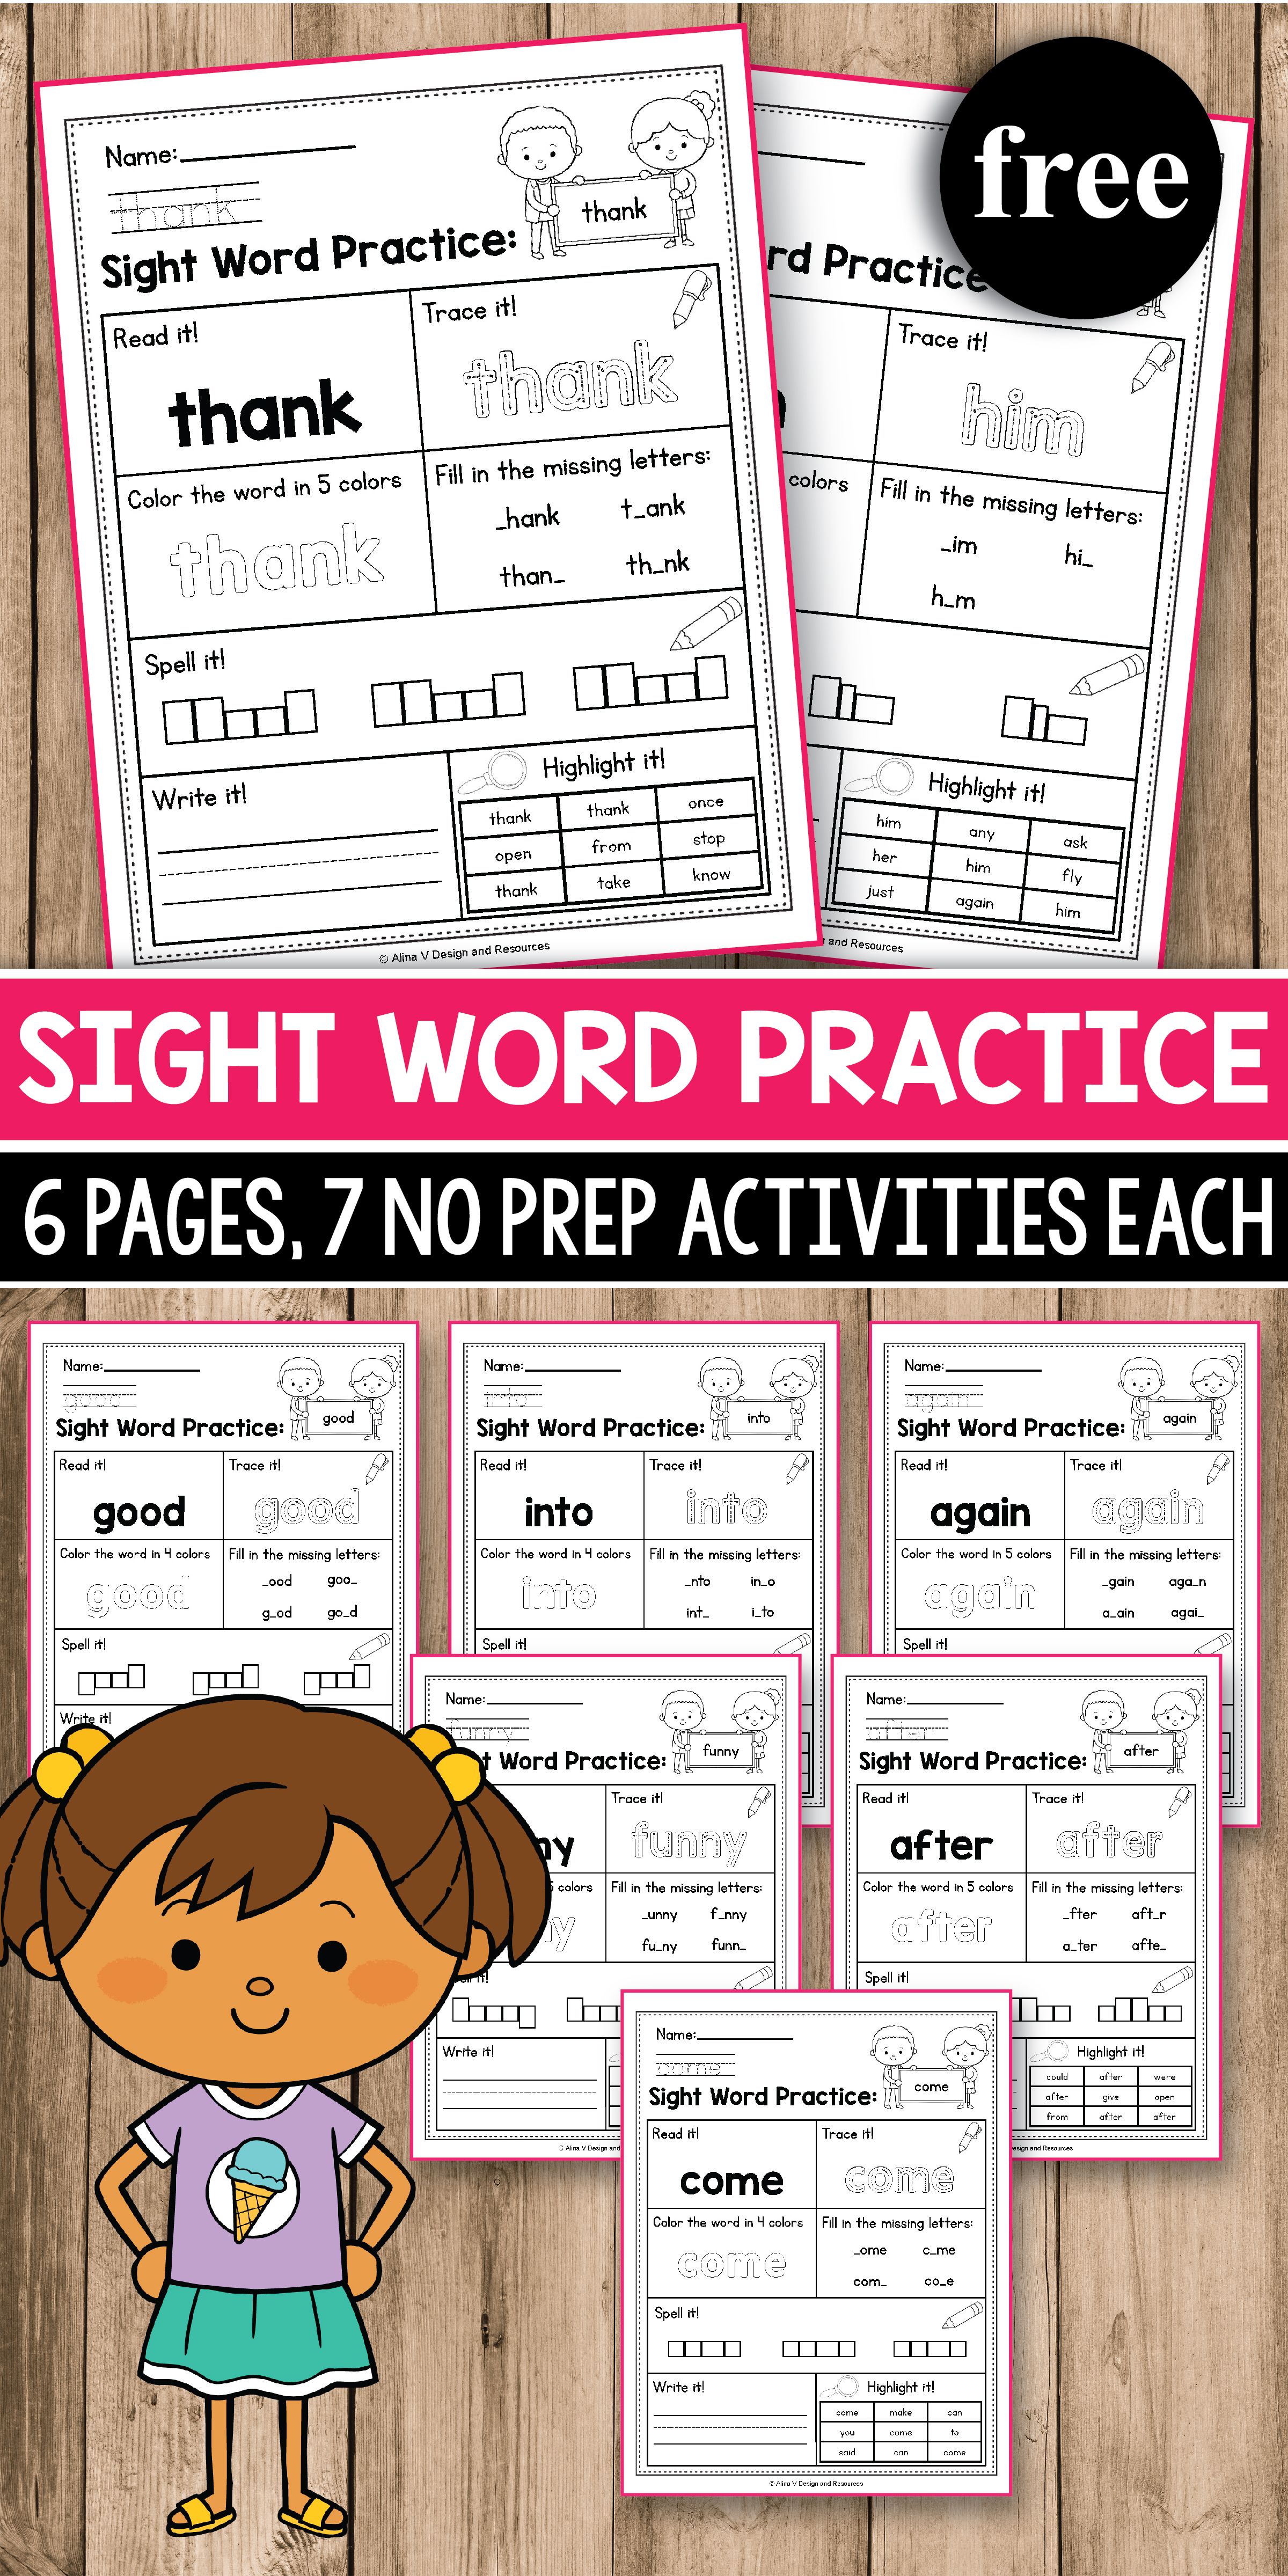 90 Sight Word Practice Worksheets 74